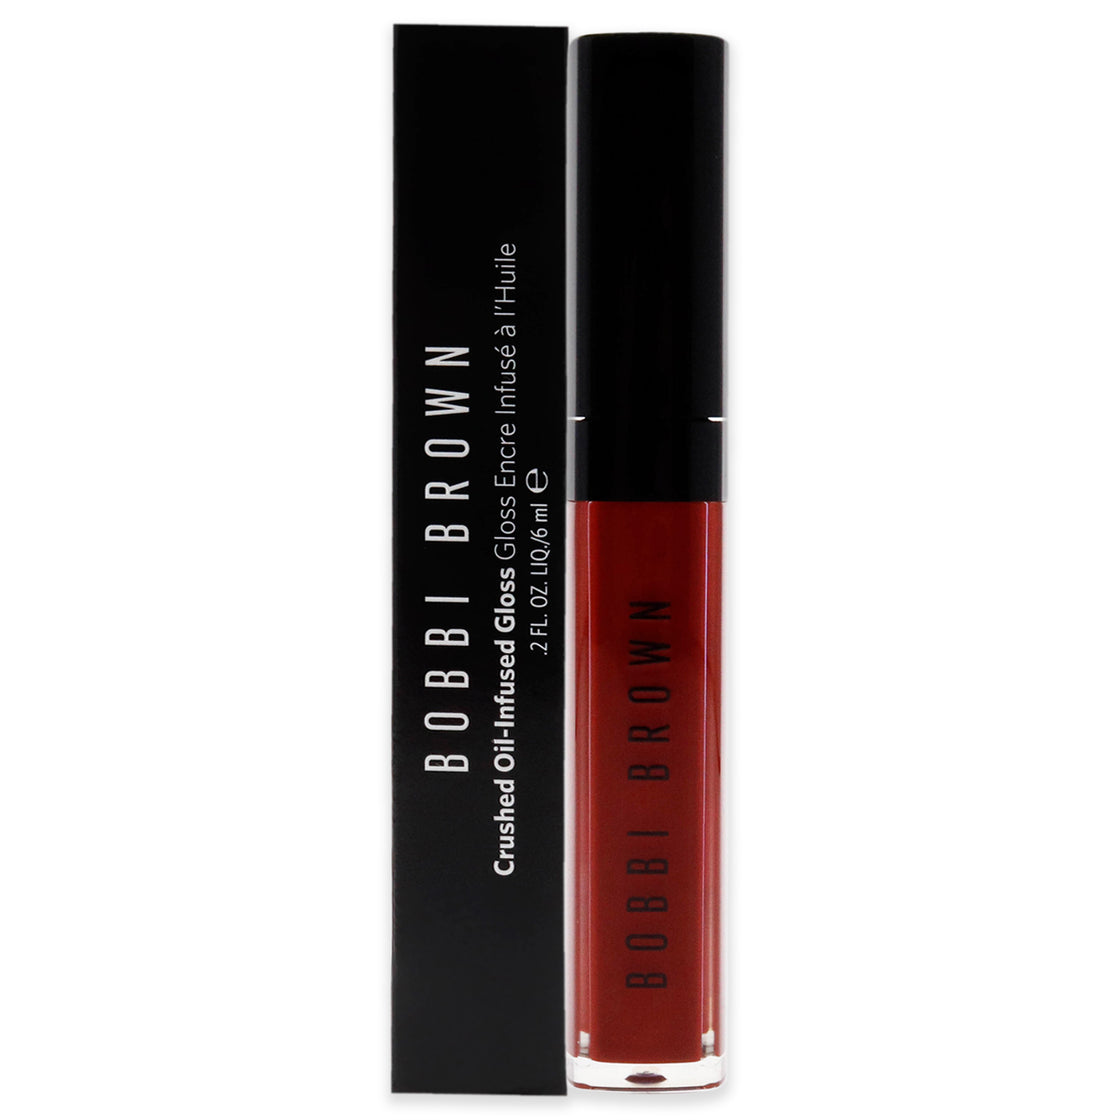 Crushed Oil-Infused Gloss - Rock and Red by Bobbi Brown for Women - 0.2 oz Lip Gloss